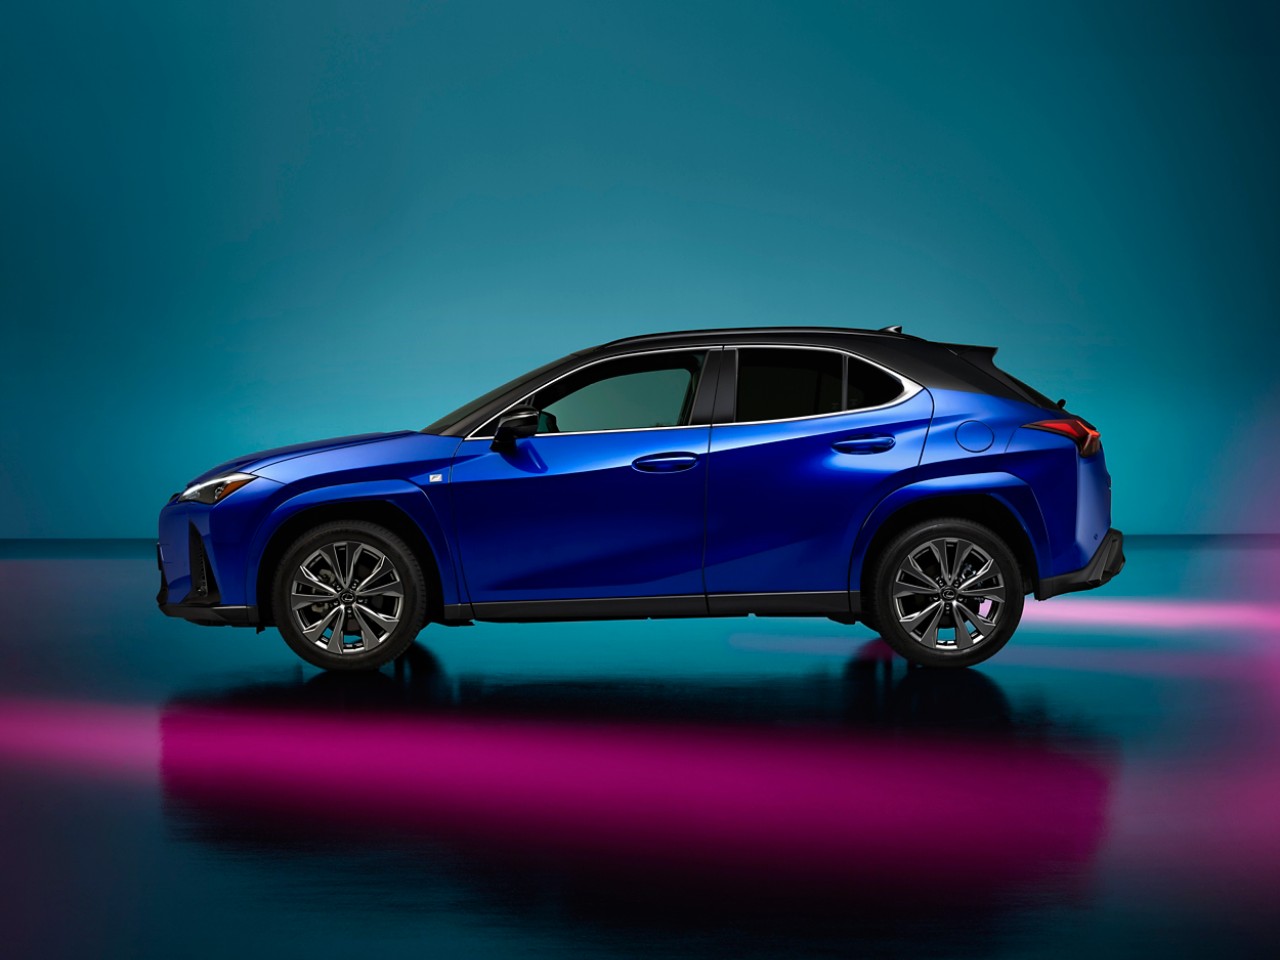 Side profile of the Lexus UX